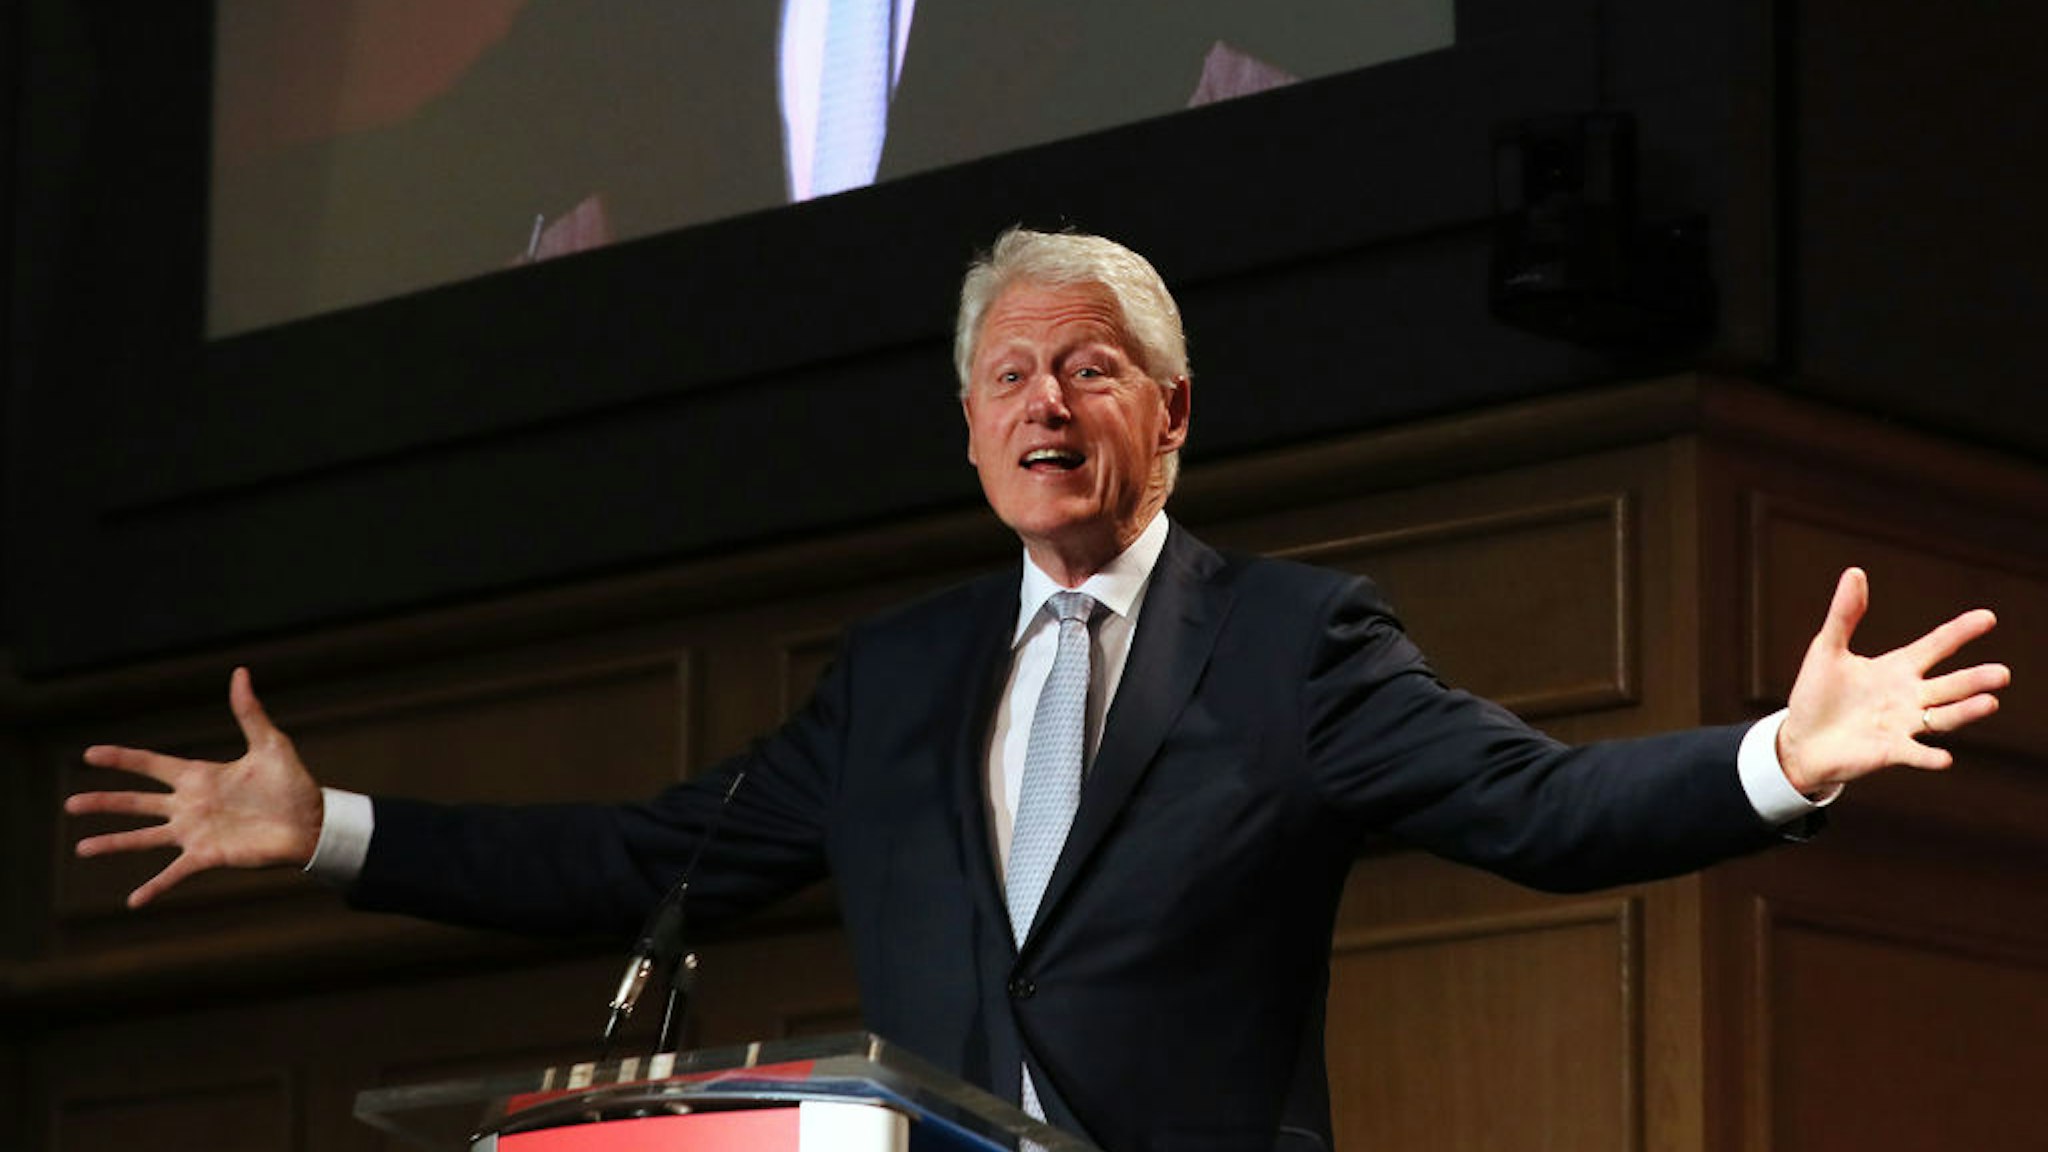 Former US President Bill Clinton, speaking at a Concern Worldwide conference in Dublin.